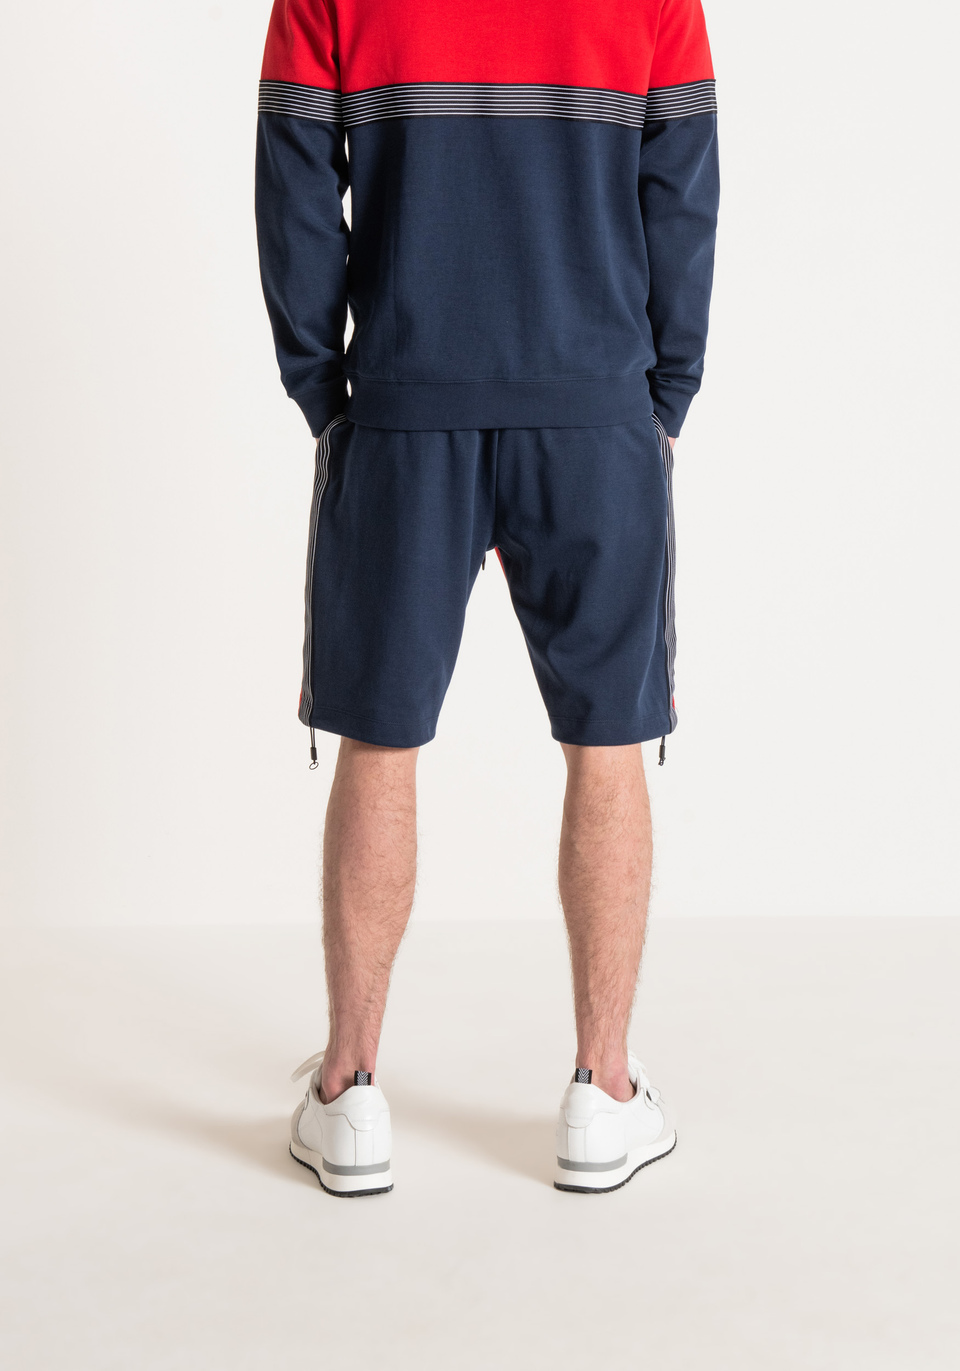 TRACK SHORTS IN COTTON-BLEND FLEECE WITH SIDE BAND DETAILS - Antony Morato Online Shop